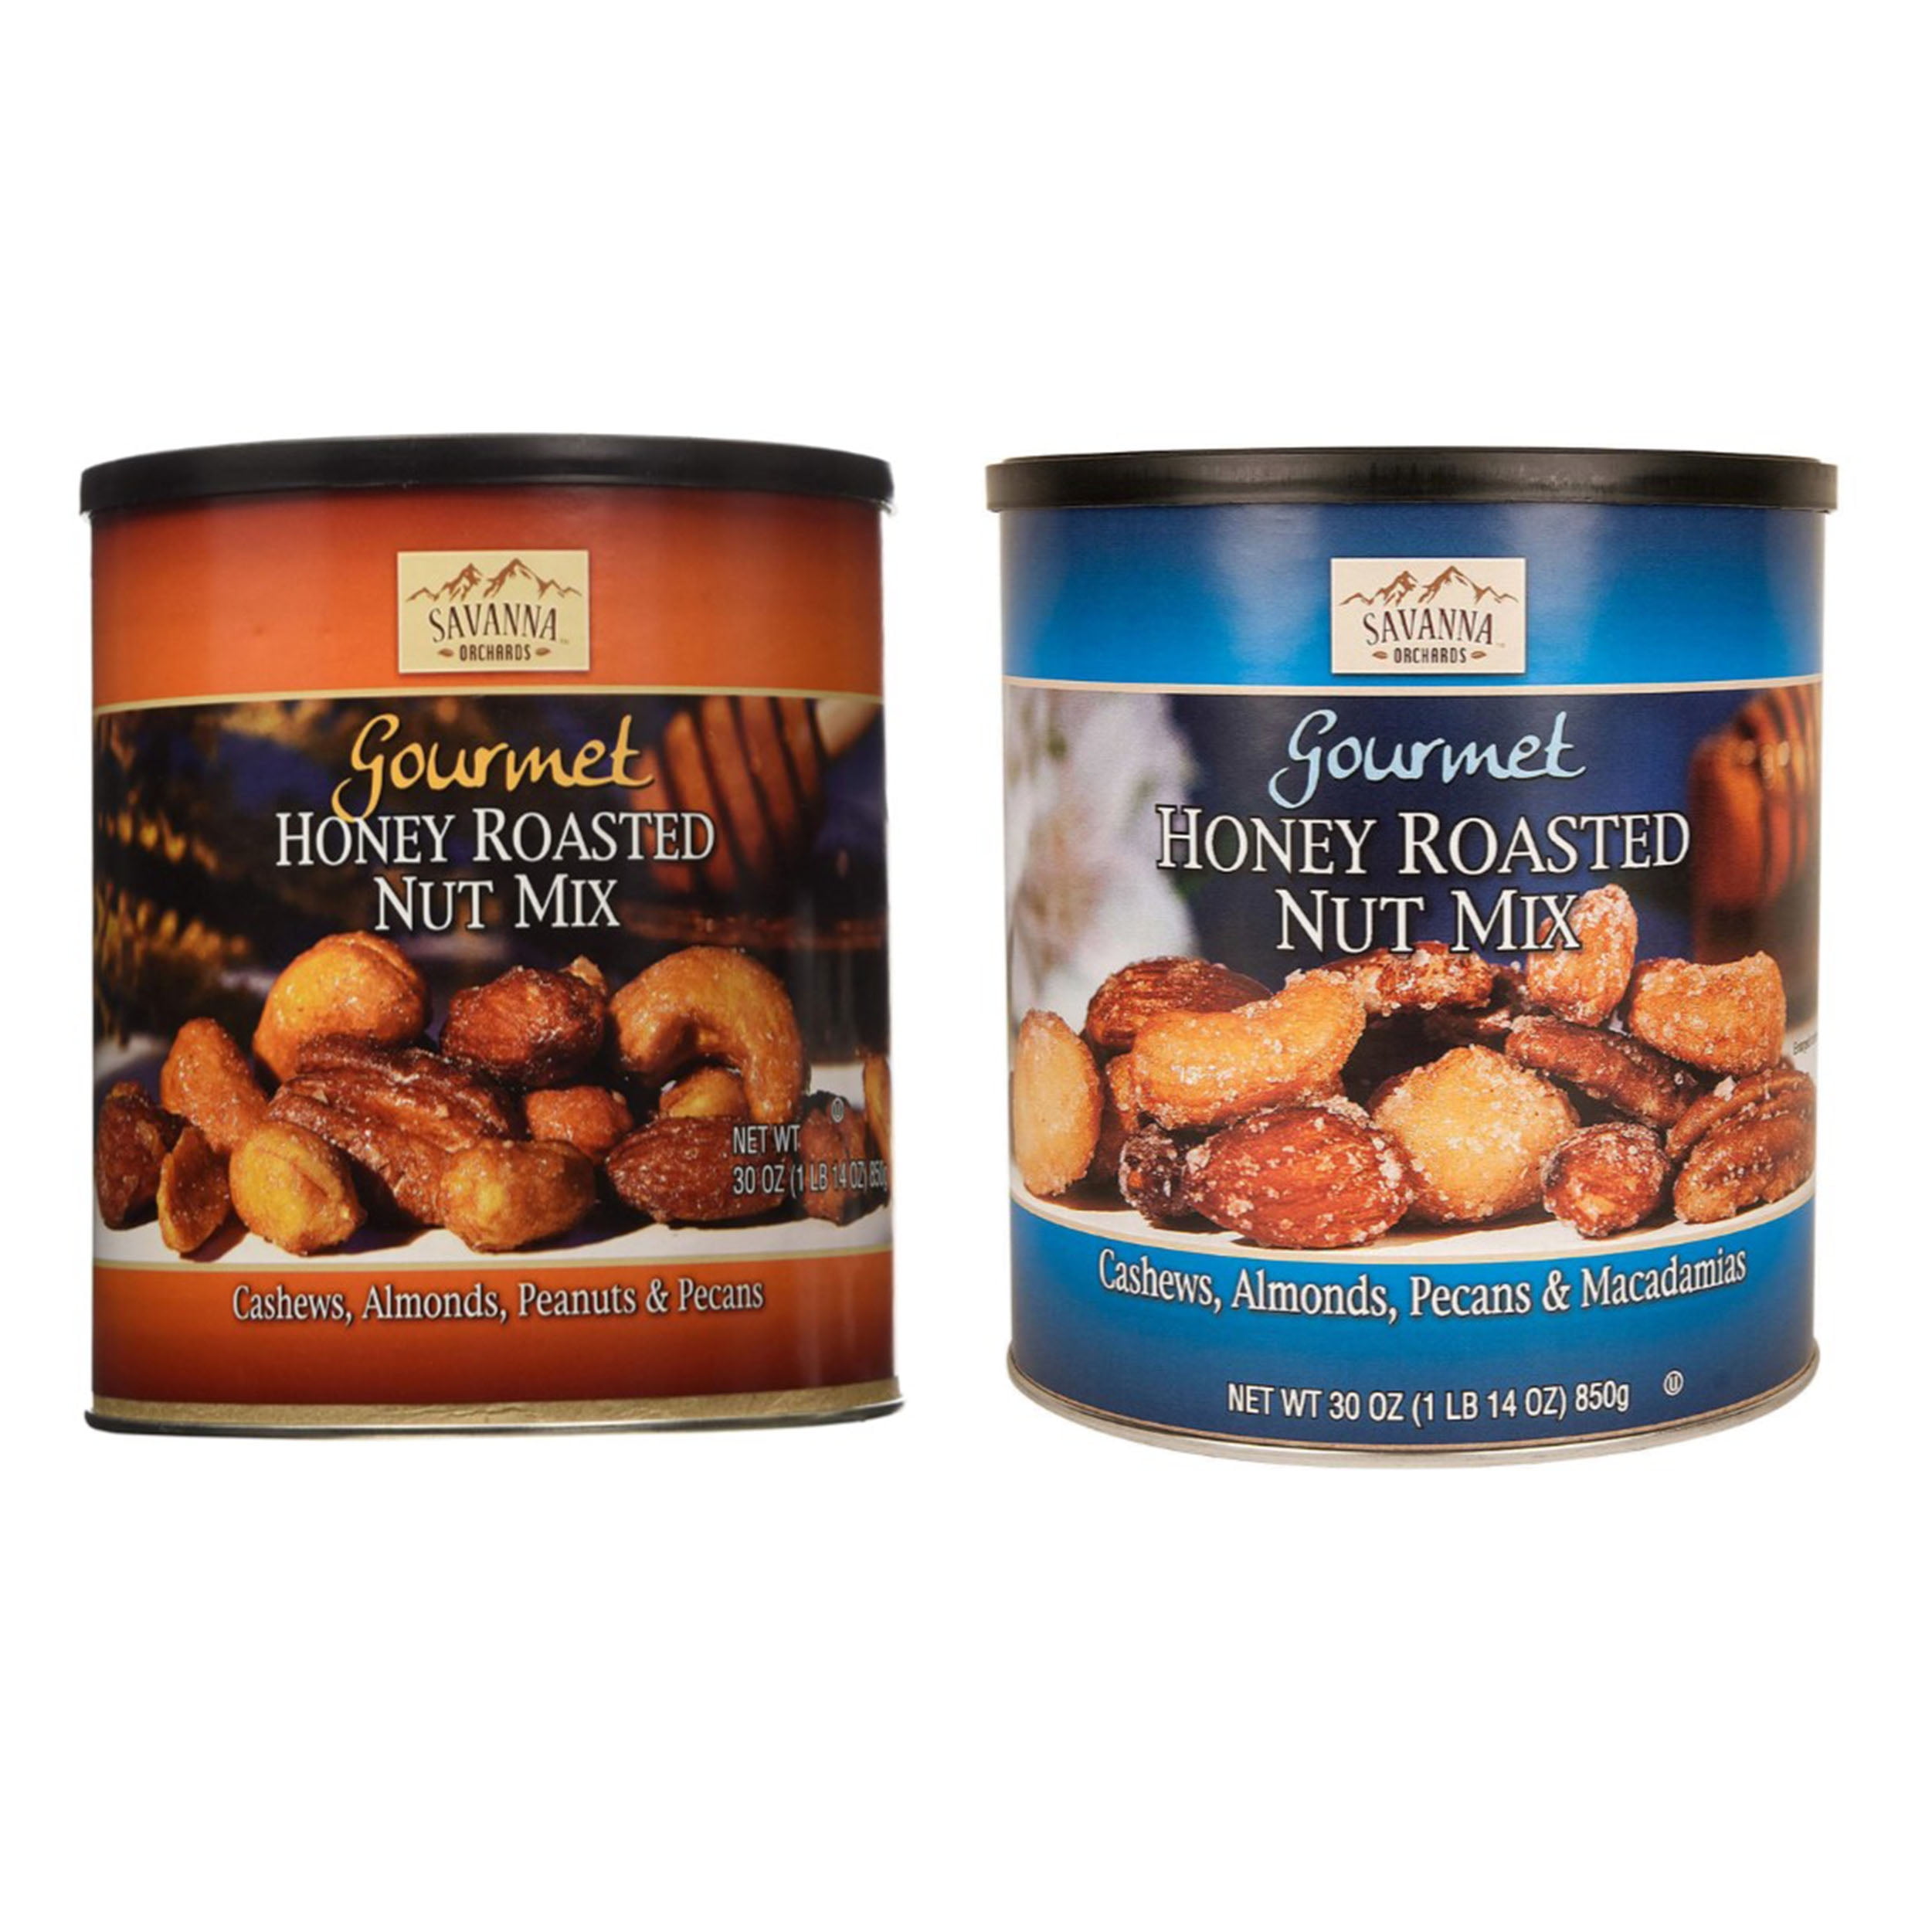 Savanna Orchards Gourmet Honey Roasted Nut Mix 2 Different Mixes 30 Oz.  Each (Pack of 2)